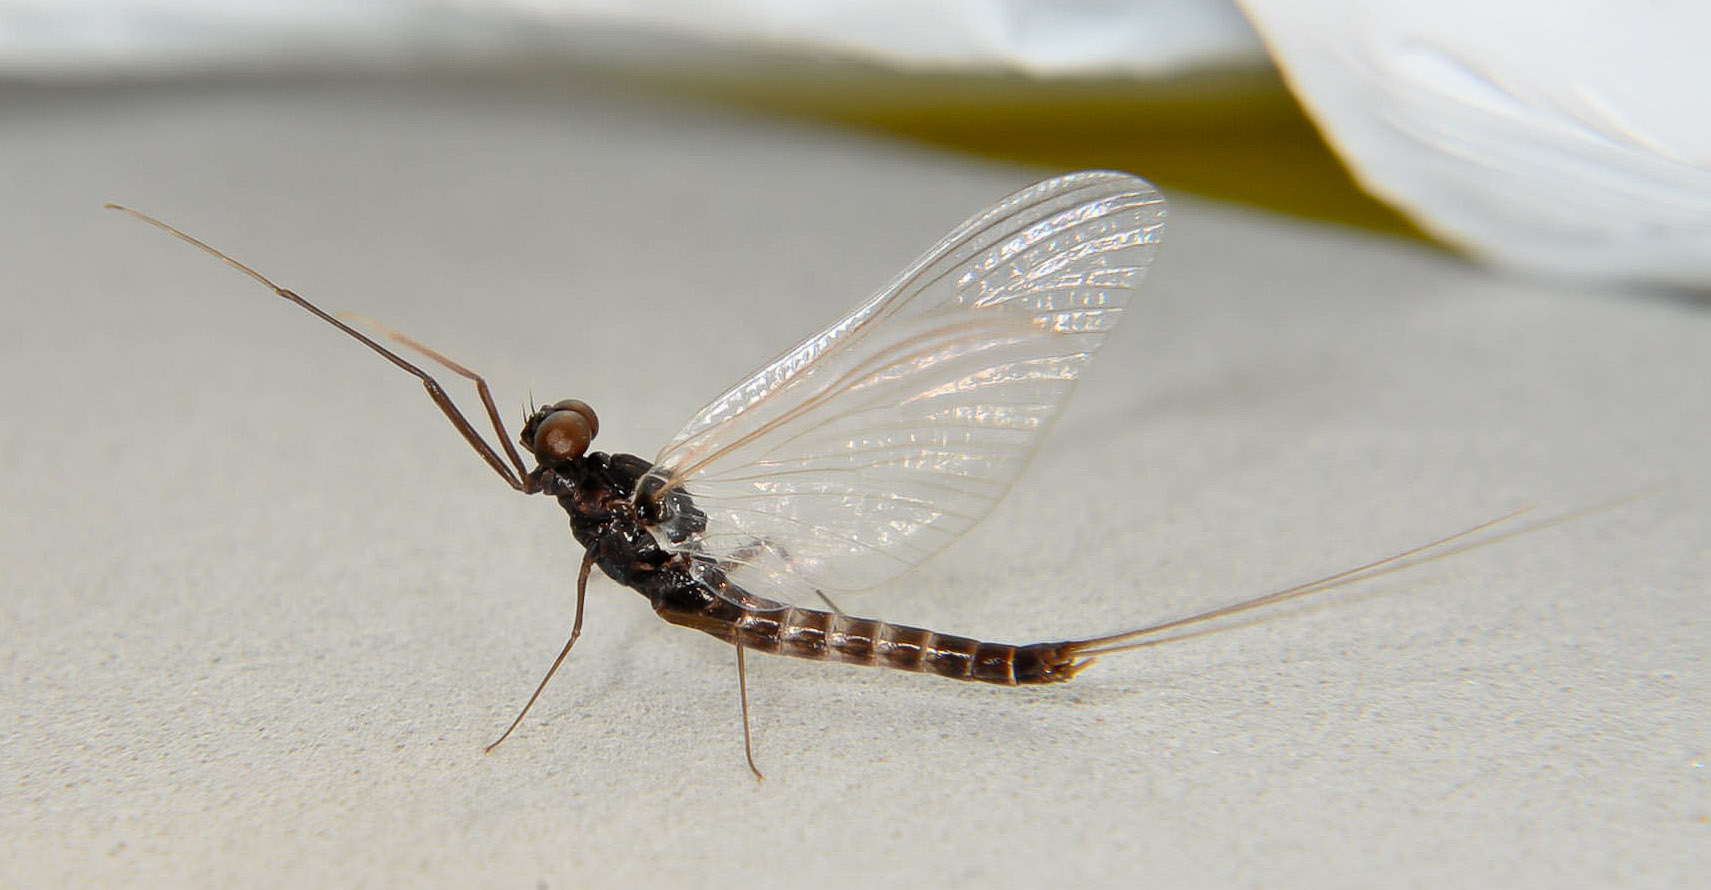 Male Neoleptophlebia heteronea (Blue Quill) Mayfly Spinner from the Touchet River in Washington